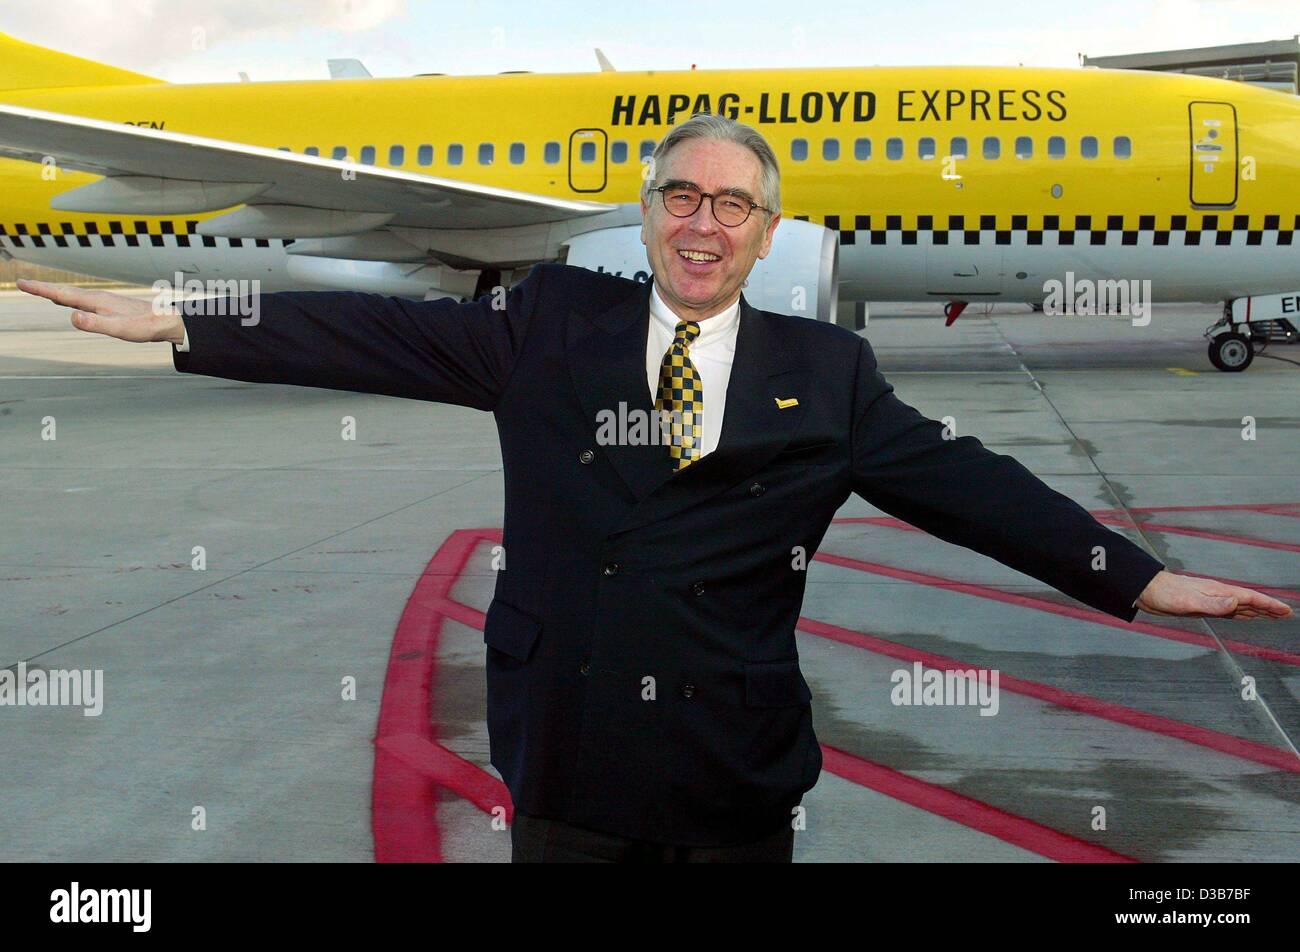 (dpa) - Wolfgang Kurth, general manager of the airline Hapag-Lloyd Express, stretches his arms simulating an aircraft at the Cologne Bonn Airport, 3 December 2002. The Boeing 737-700 in the background with its striking yellow coating reminds of New York cabs. Hapag-Lloyd Express belongs to the TUI g Stock Photo